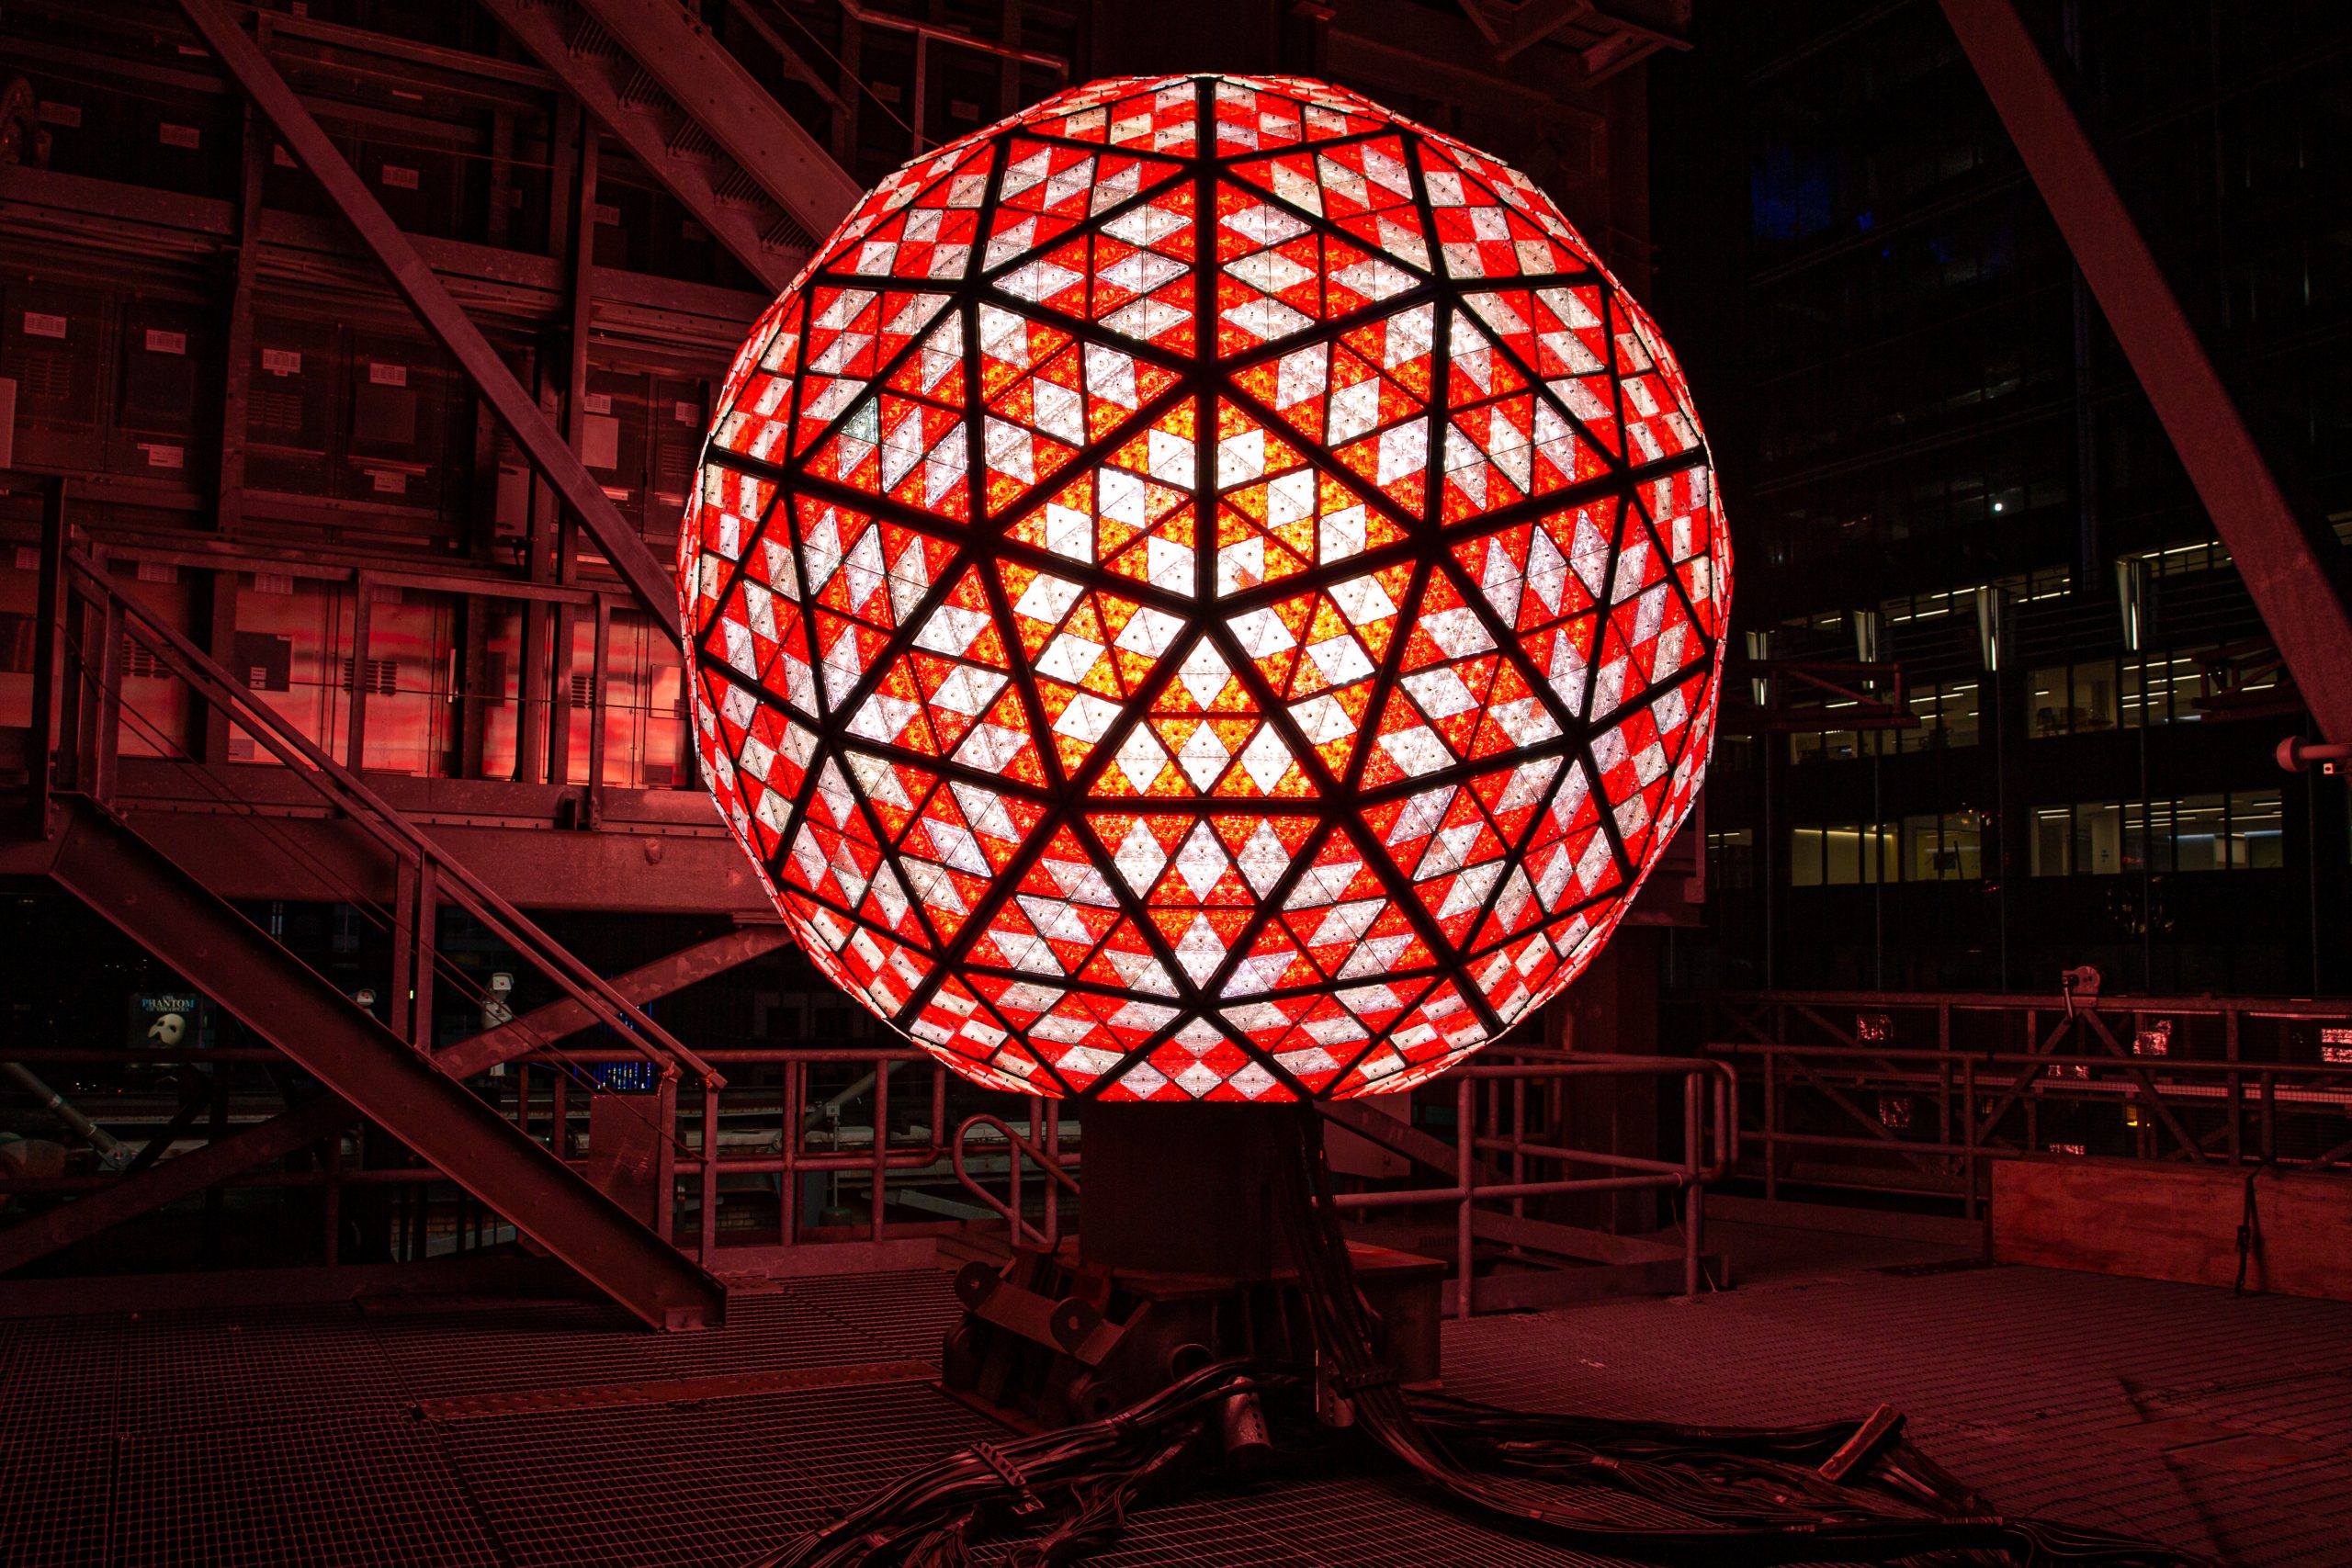 Waterford Crystal “Gift of Happiness” Times Square Ball